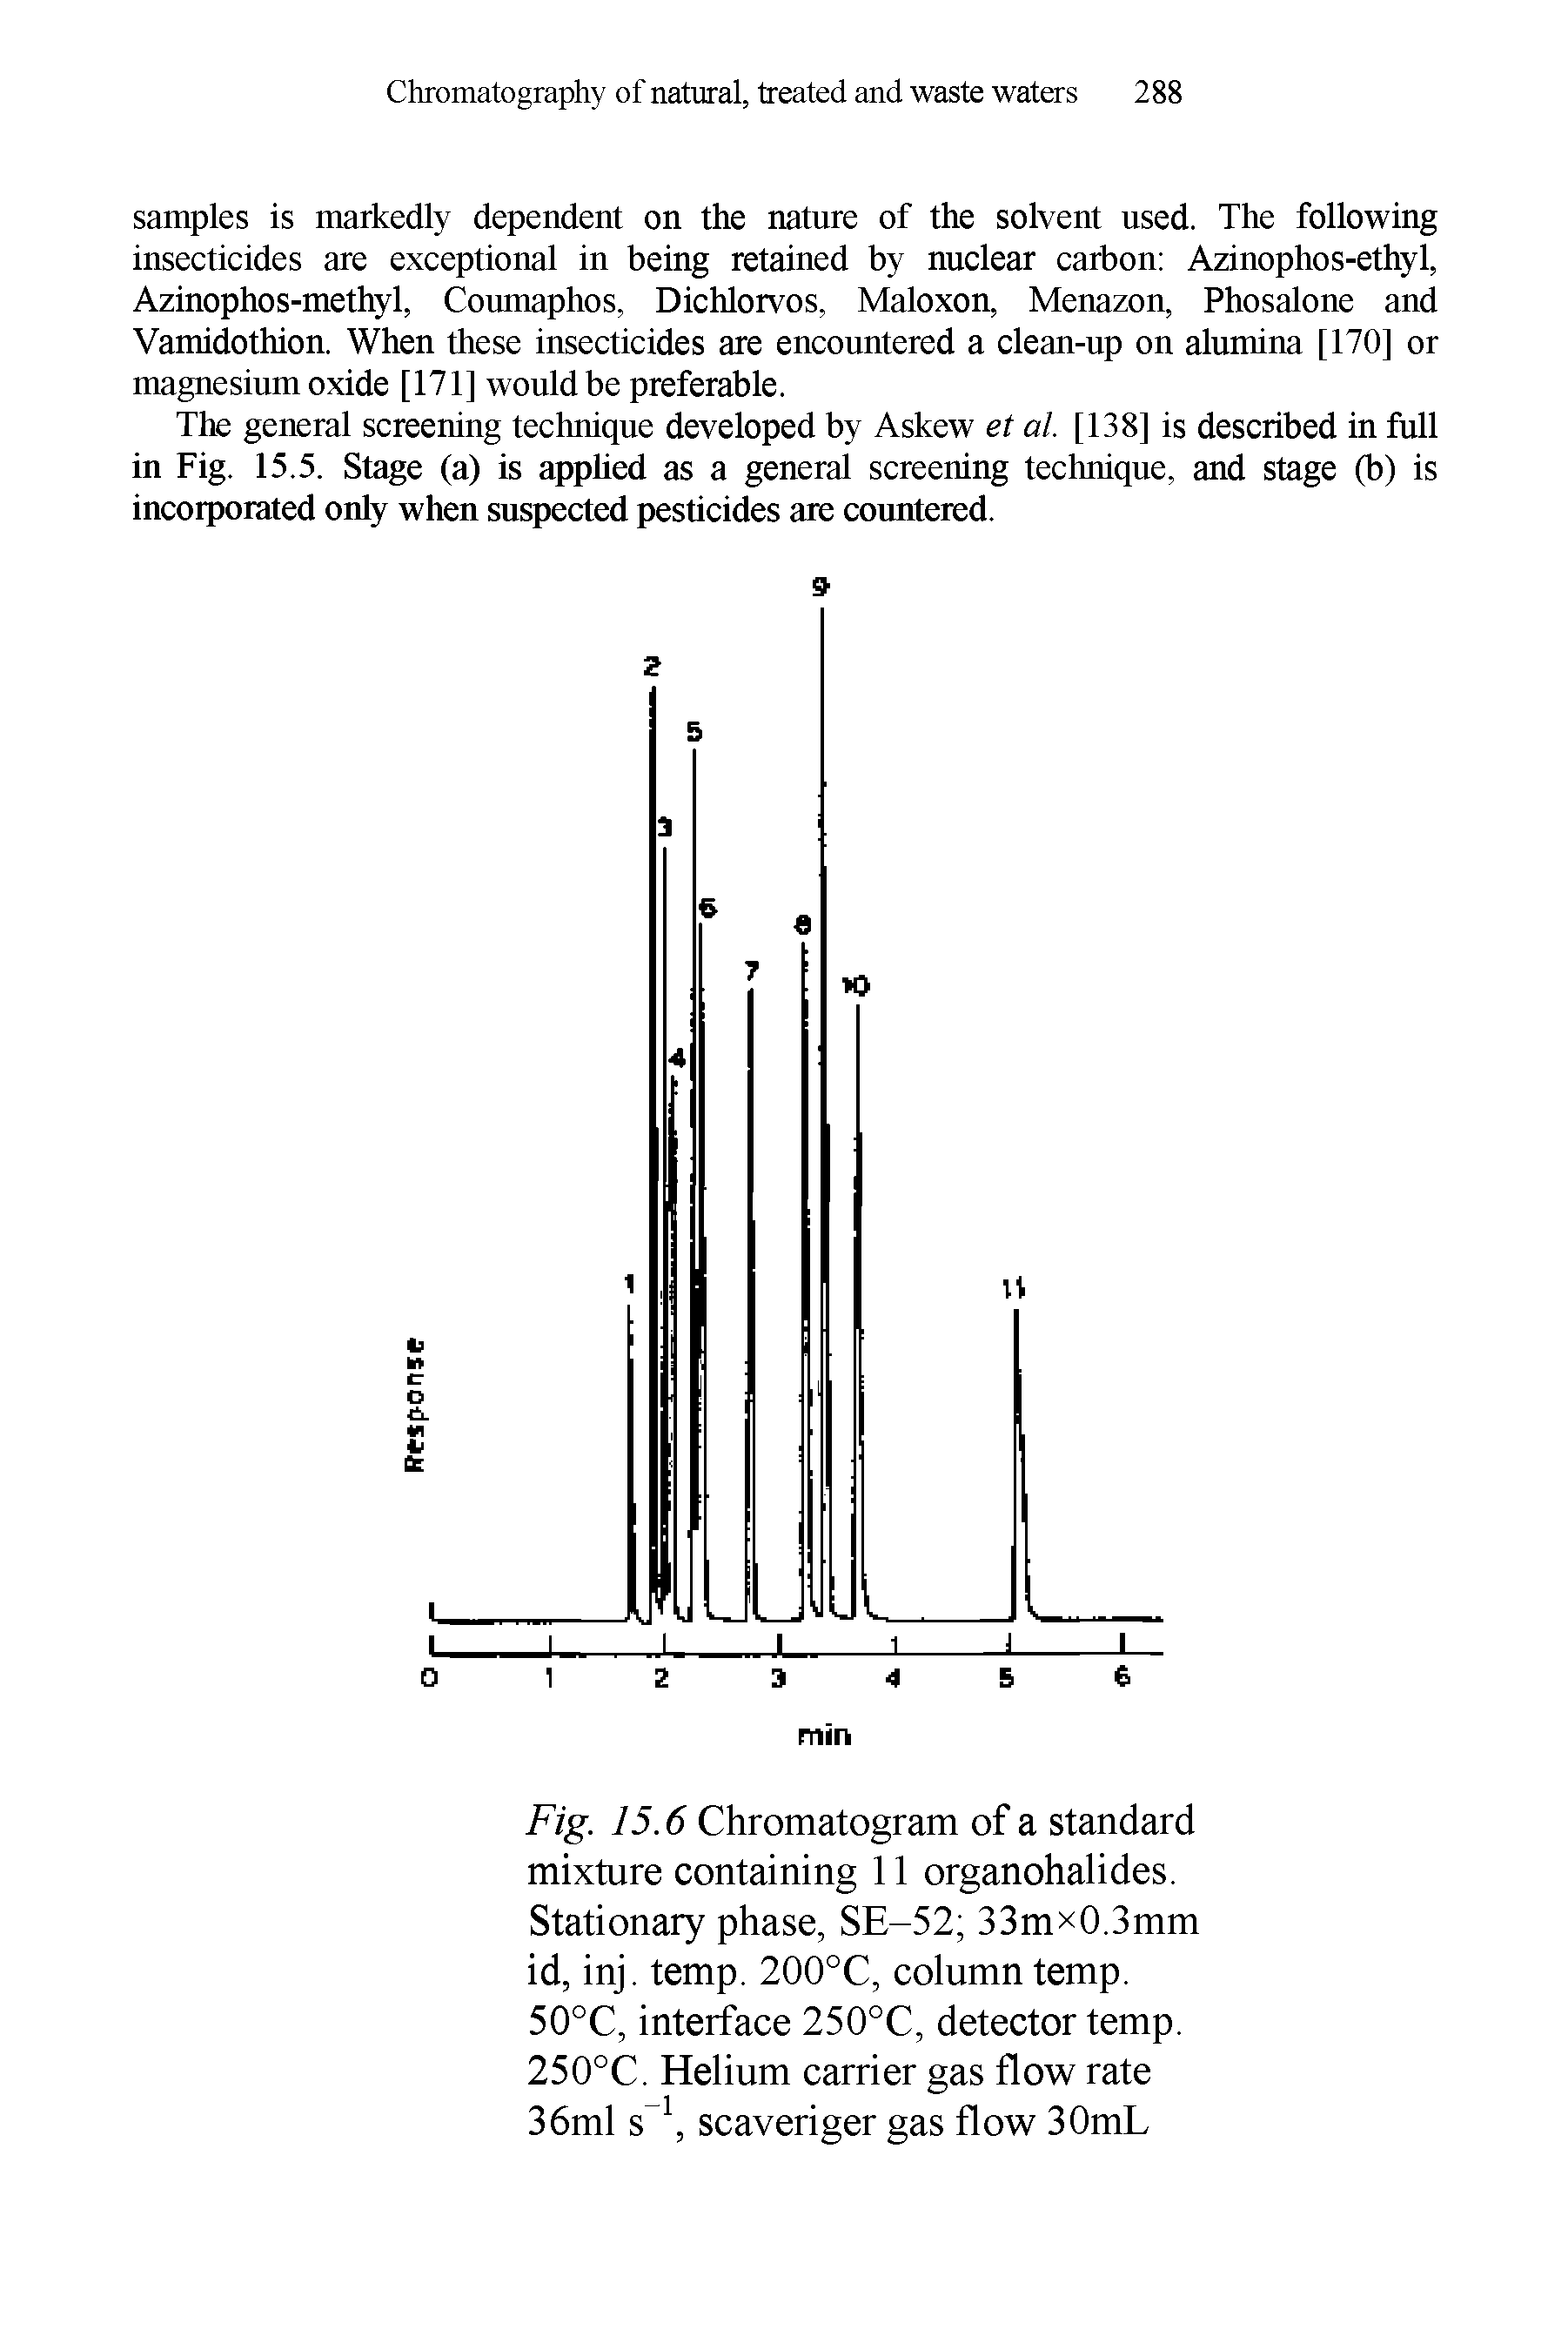 Fig. 15.6 Chromatogram of a standard mixture containing 11 organohalides. Stationary phase, SE-52 33mx0.3mm id, inj. temp. 200°C, column temp. 50°C, interface 250°C, detector temp. 250°C. Helium carrier gas flow rate 36ml s-1, scavenger gas flow 30mL...